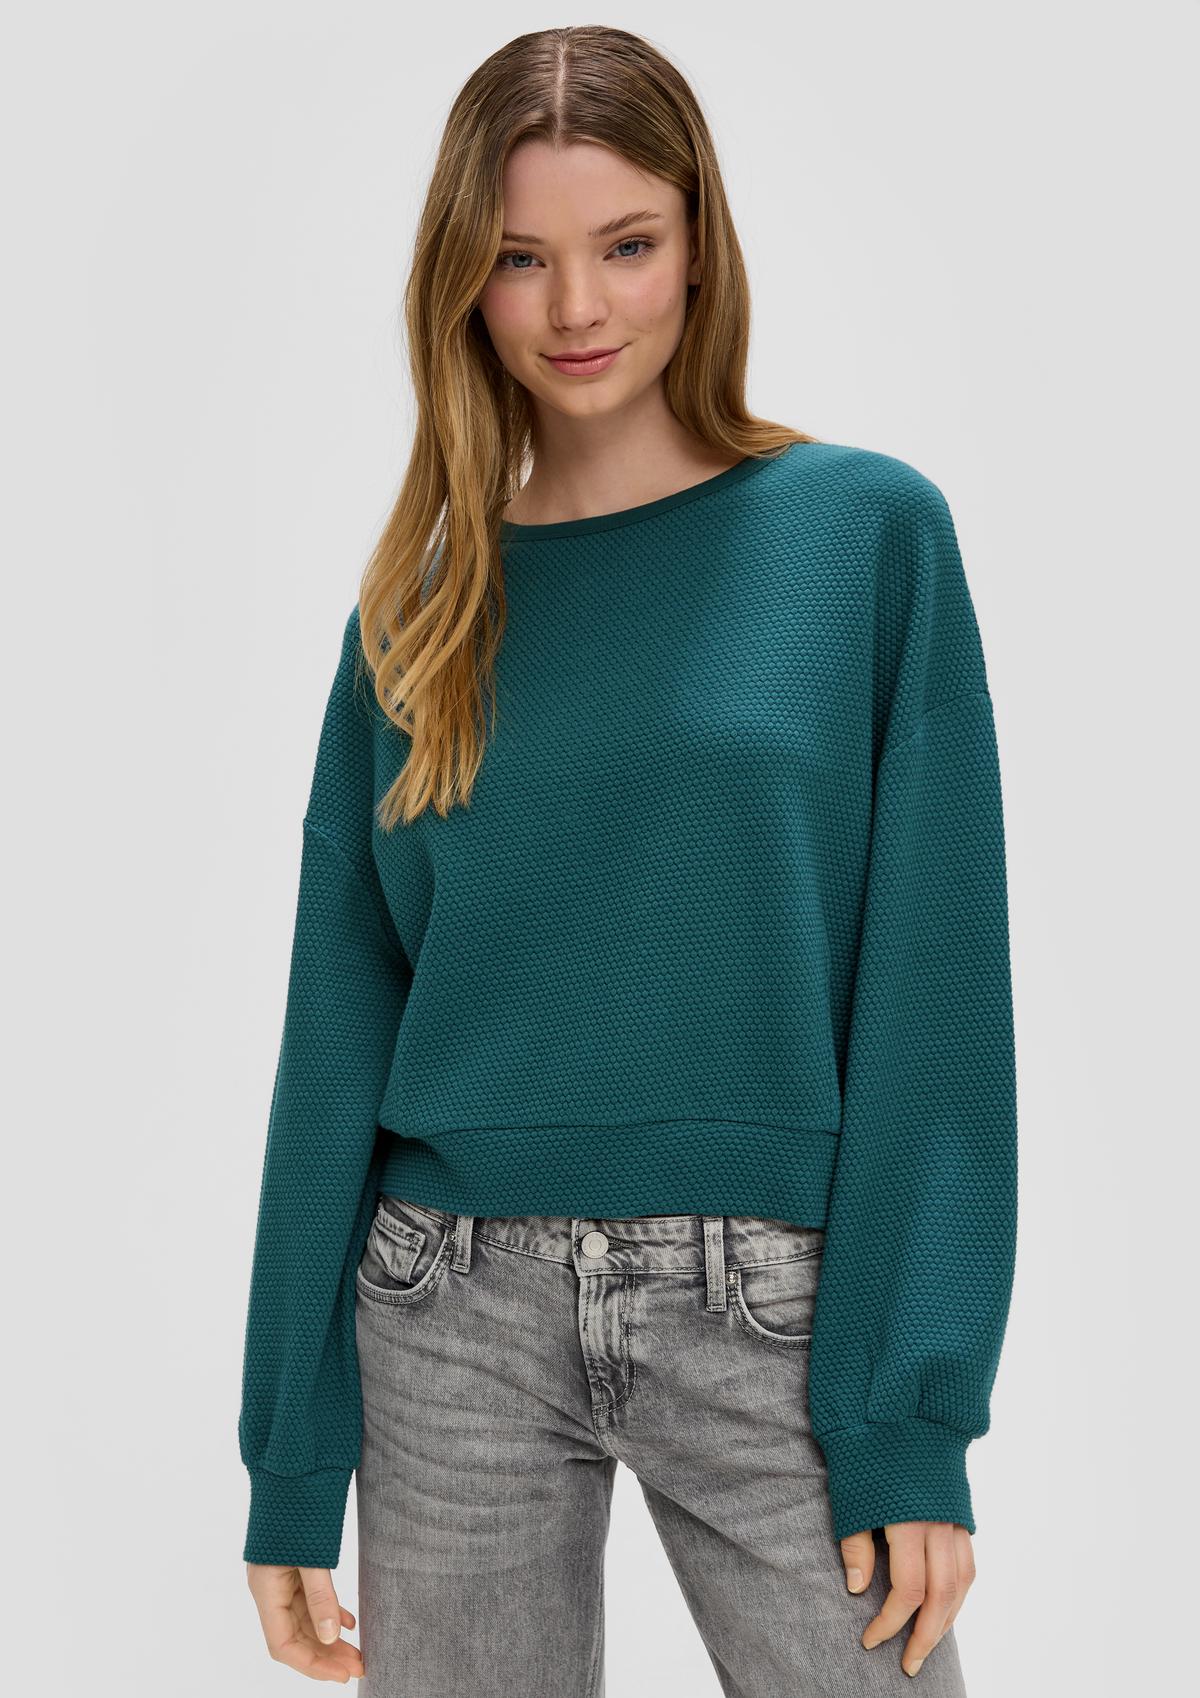 s.Oliver Sweatshirt in a boxy cut with a piqué texture